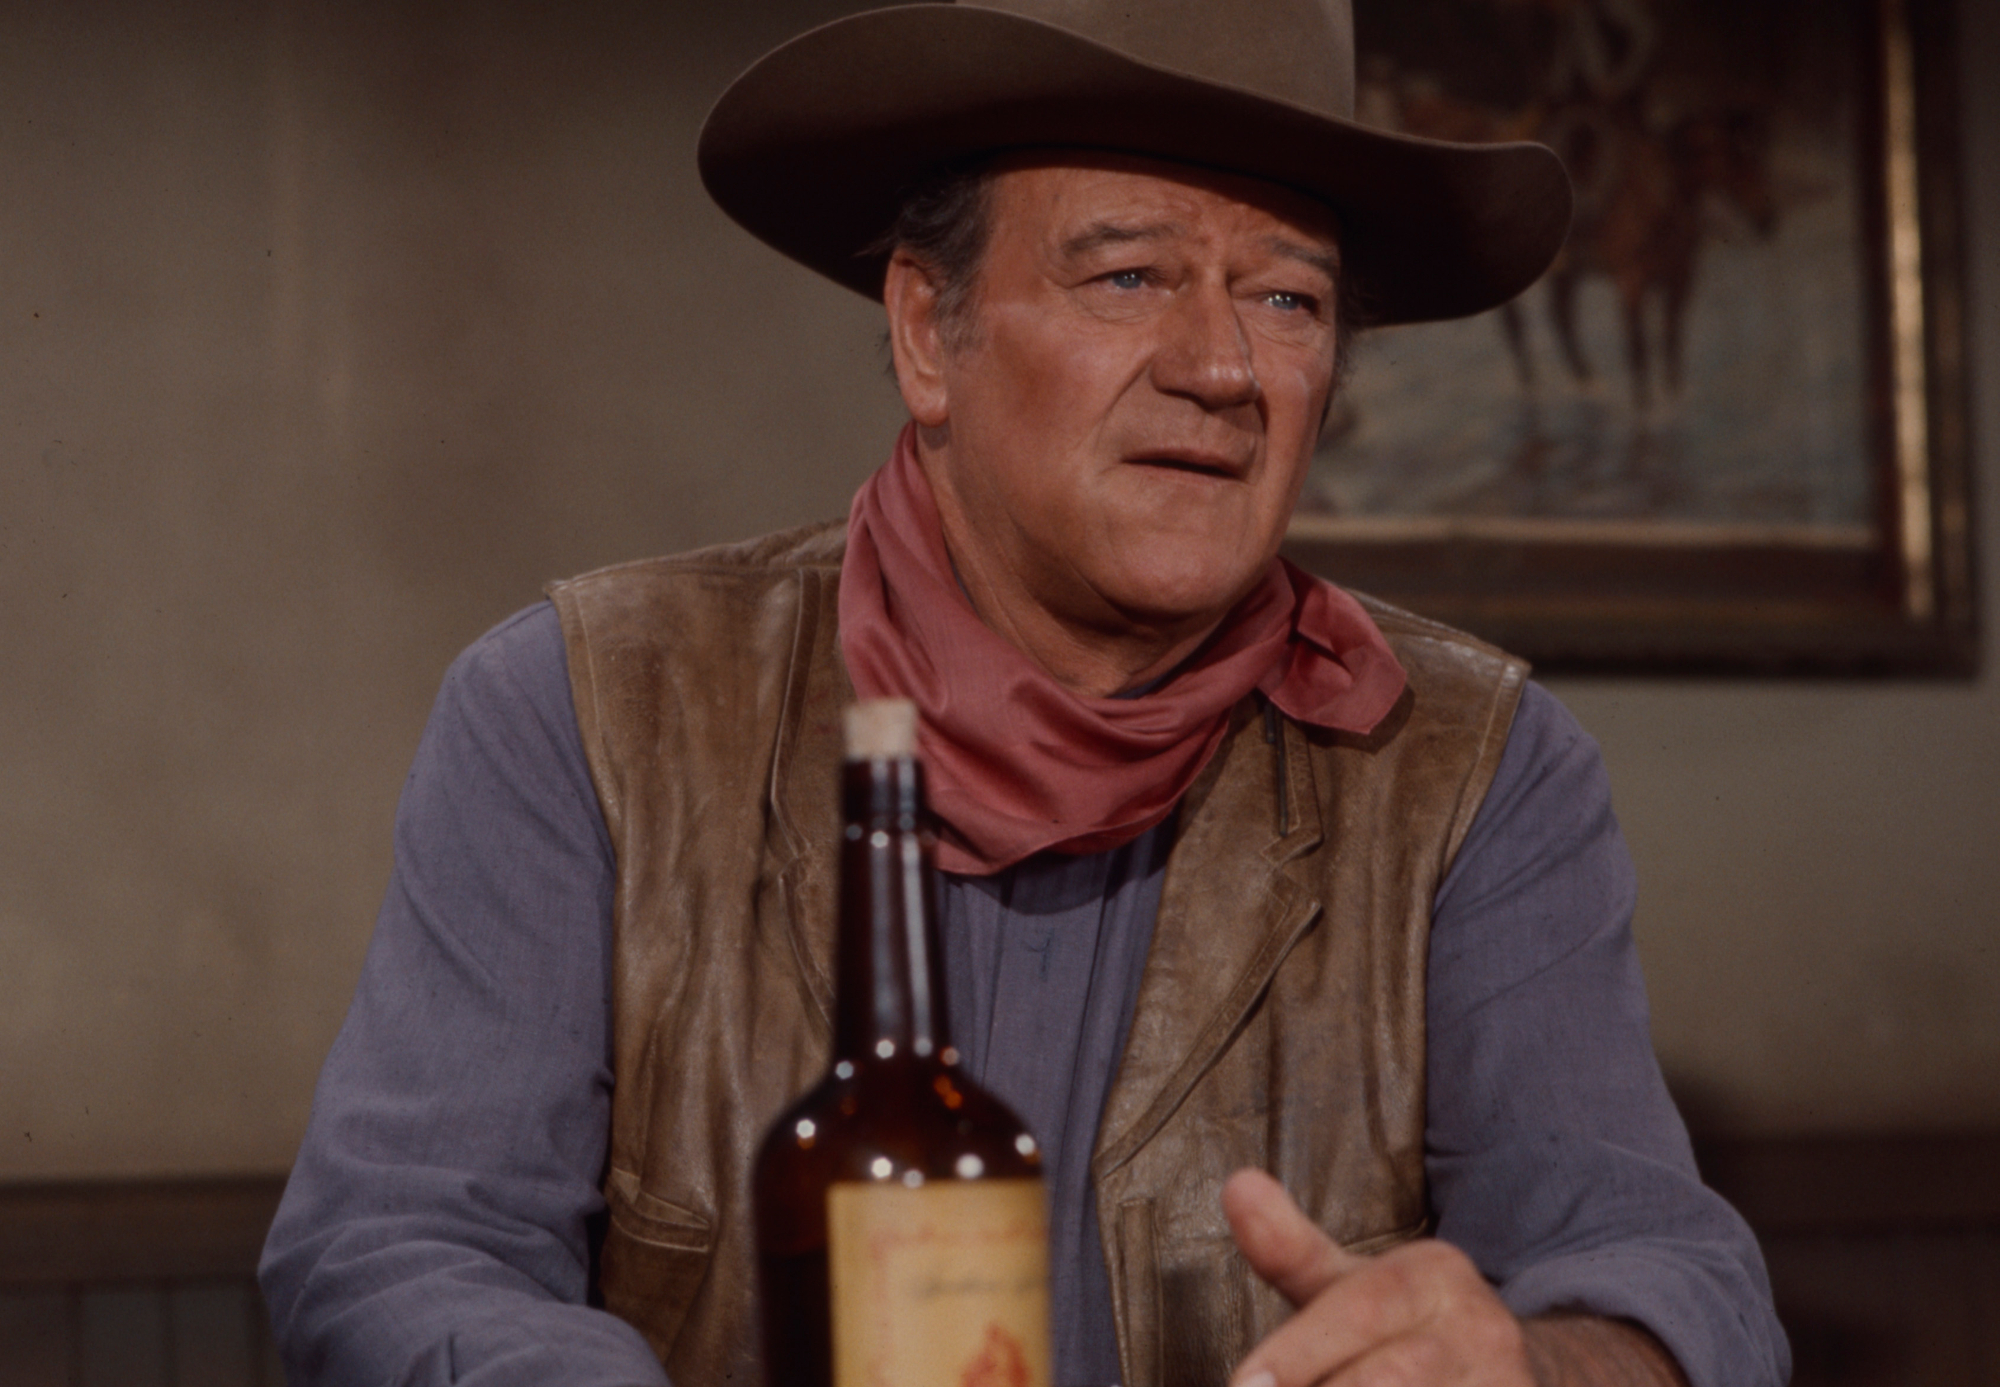 John Wayne, who starred in Western movies, wearing a cowboy costume and hat with a bottle in front of him while filming 'Rio Lobo'